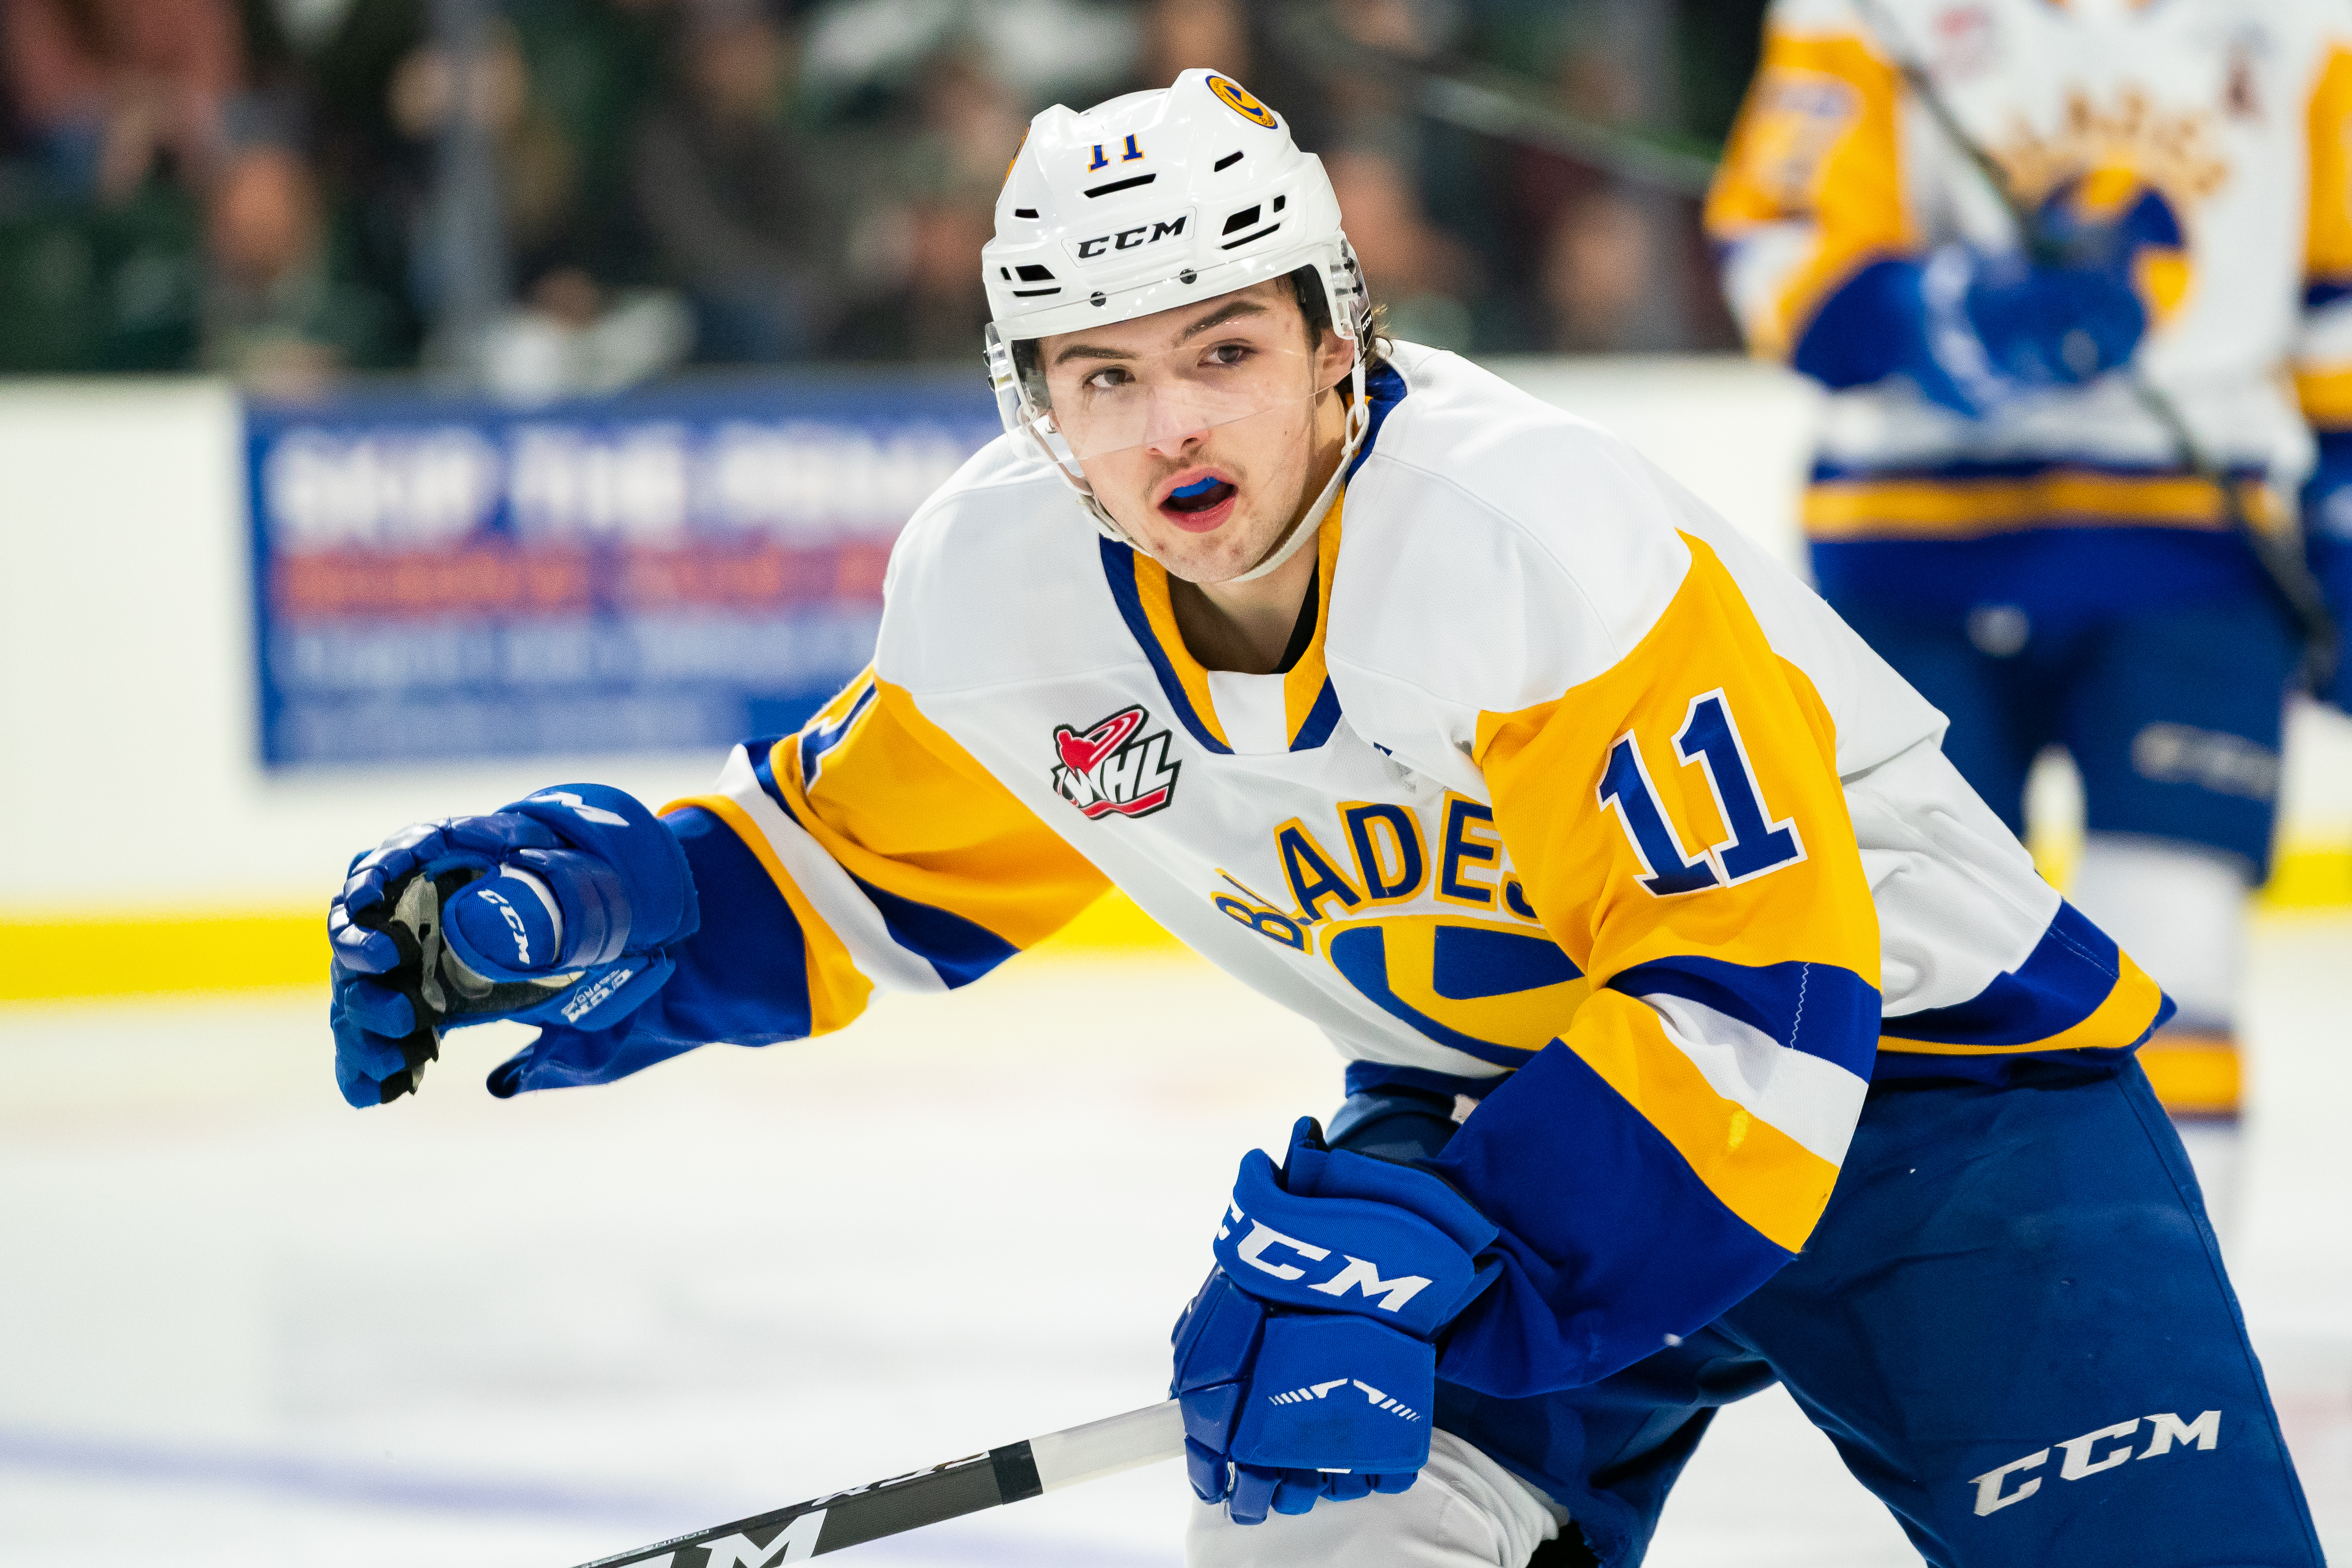 Saskatoon Blades forward Tristen Robins #11 chases the action during the third period of a game between the Everett Silvertips and the Saskatoon Blades at Angel of the Winds Arena on November 22, 2019 in Everett, Washington.